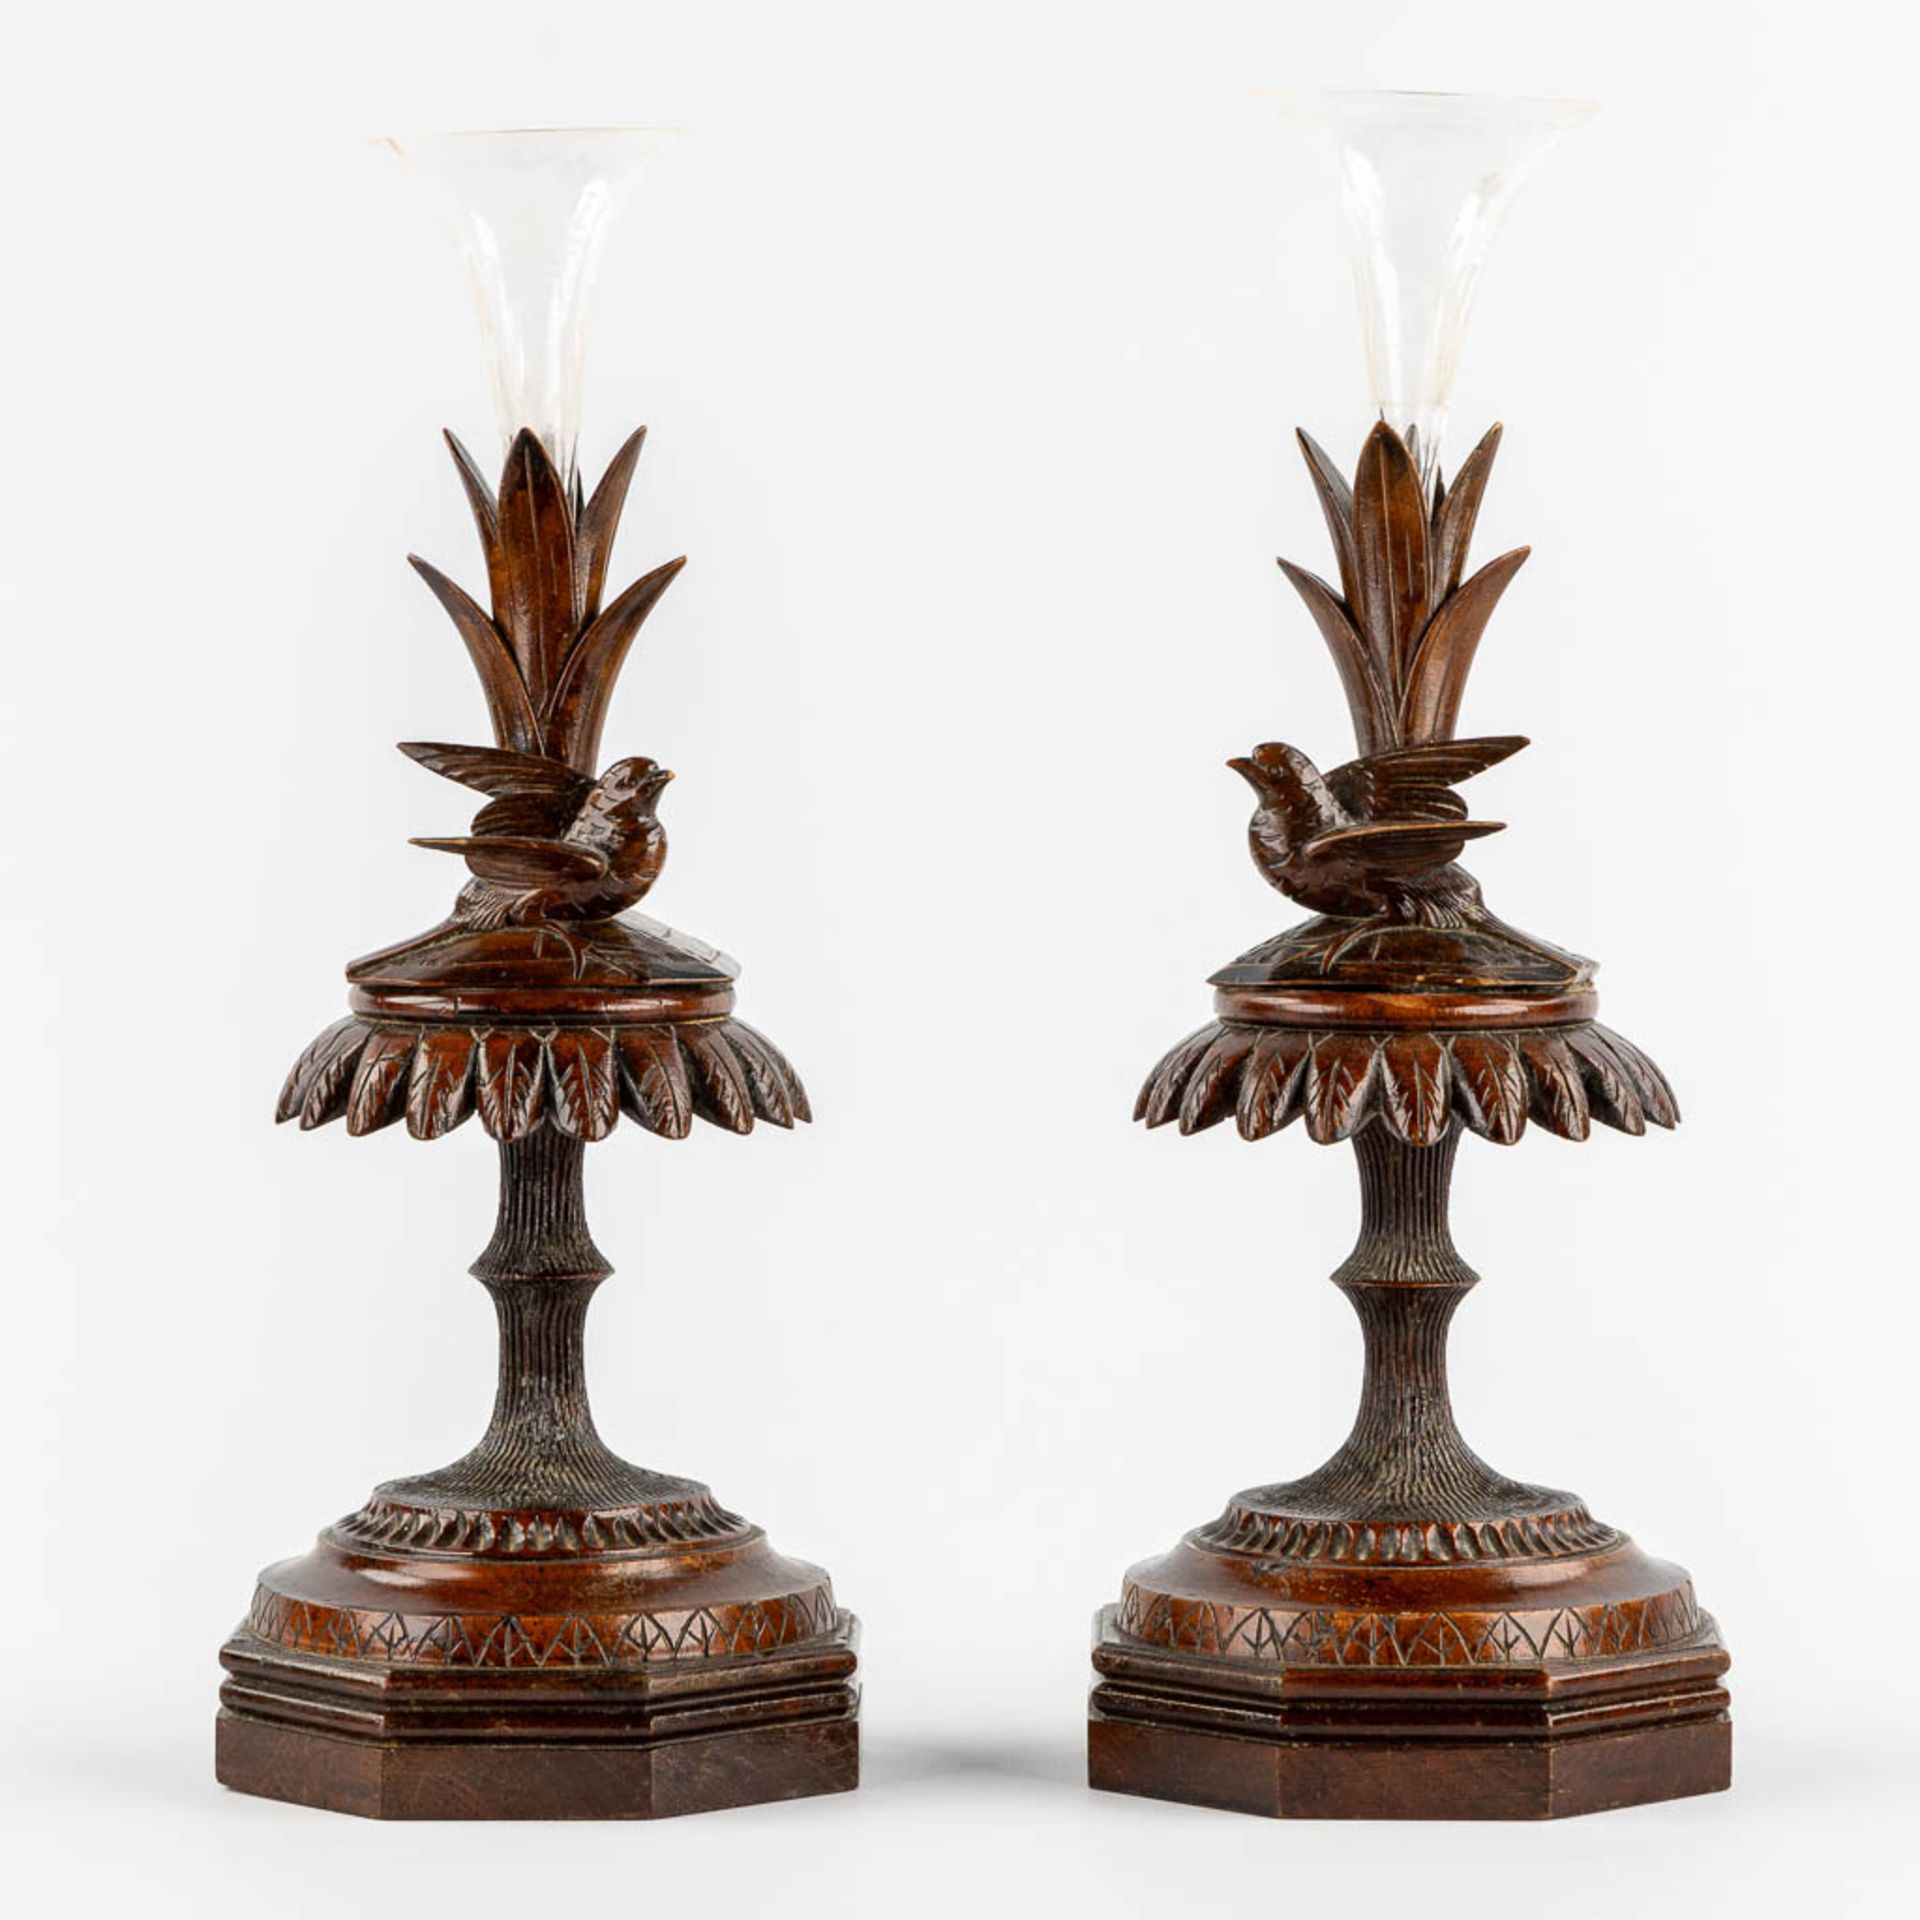 Two bases for Trumpet Vases, Schwartzwald or Black Forest. Circa 1880. (L:14,5 x W:14,5 x H:40 cm) - Image 3 of 11